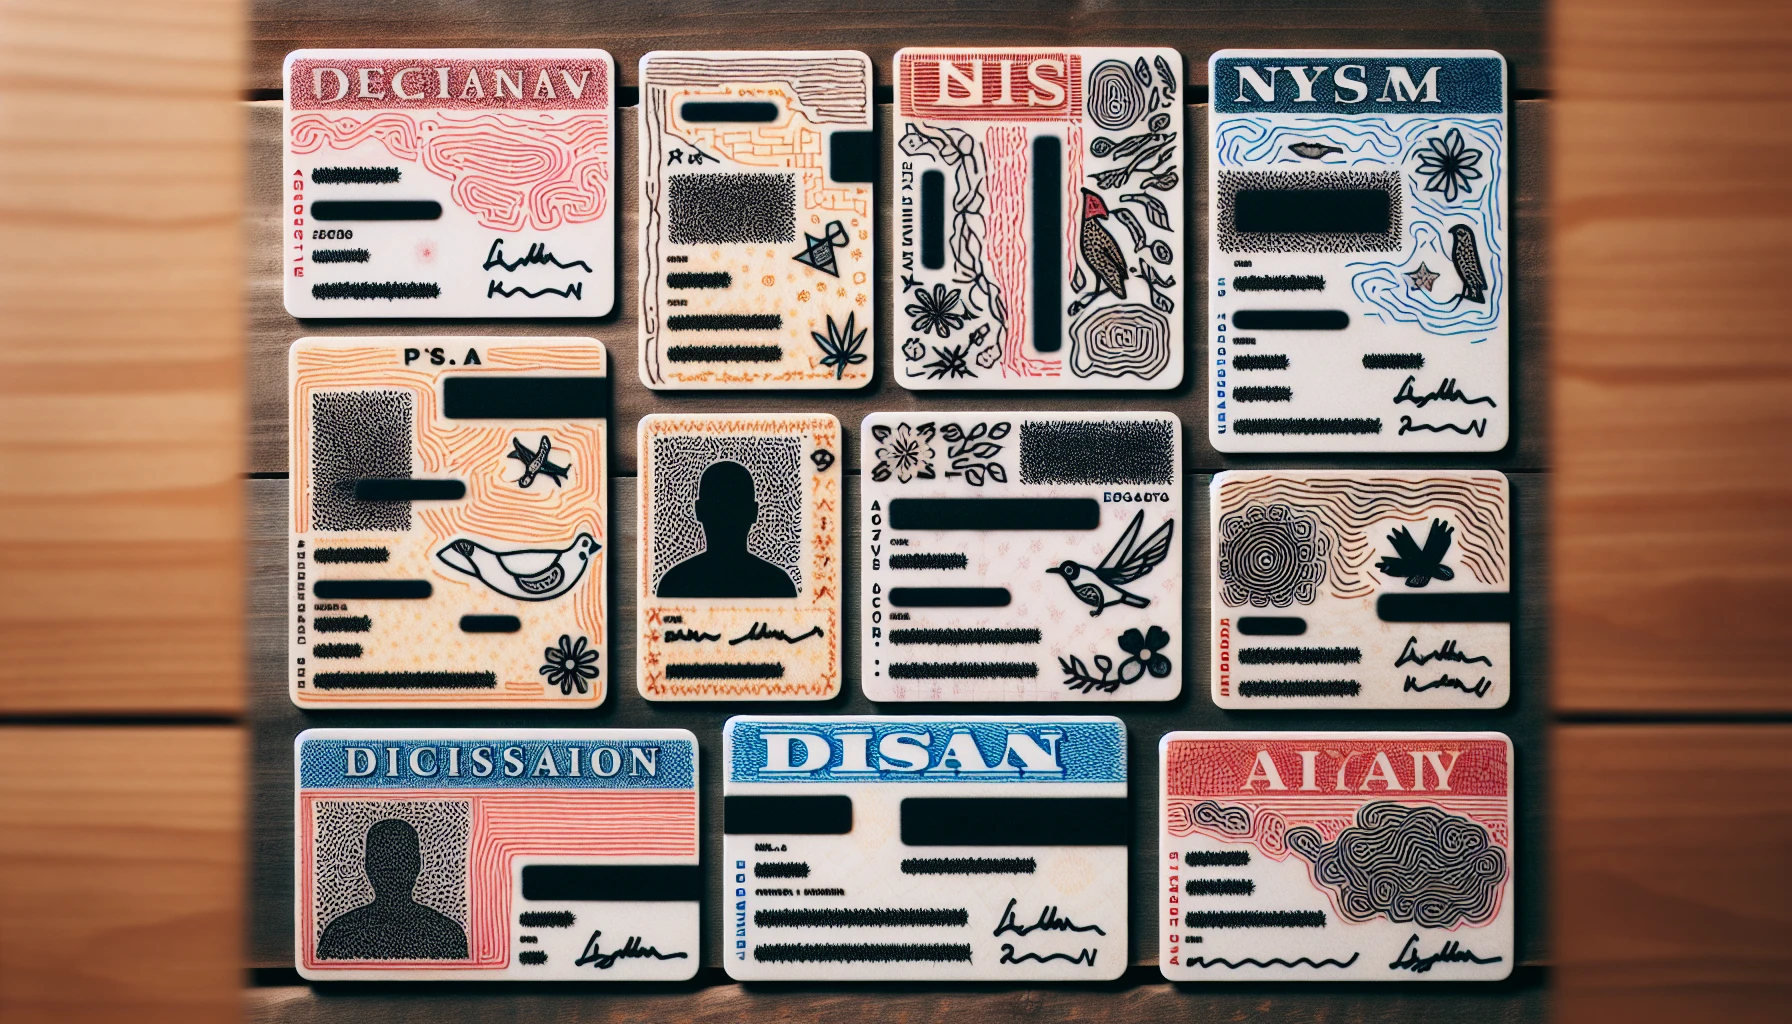 Examining state-specific symbols and signatures on identification cards